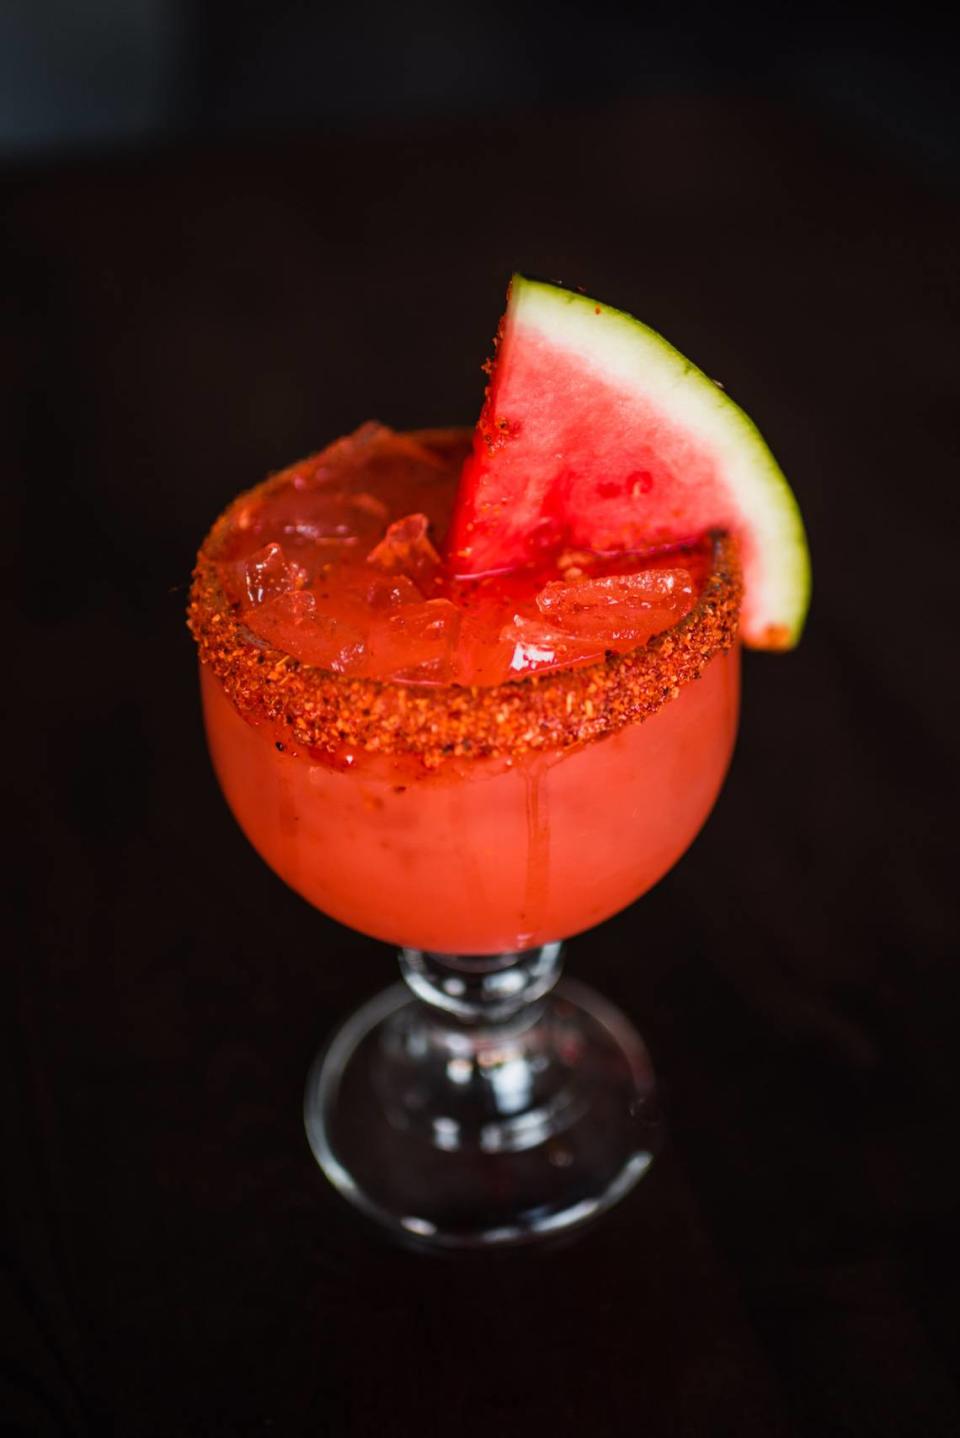 Watermelon margaritas are one of the many fresh fruit flavored options at El Charro.